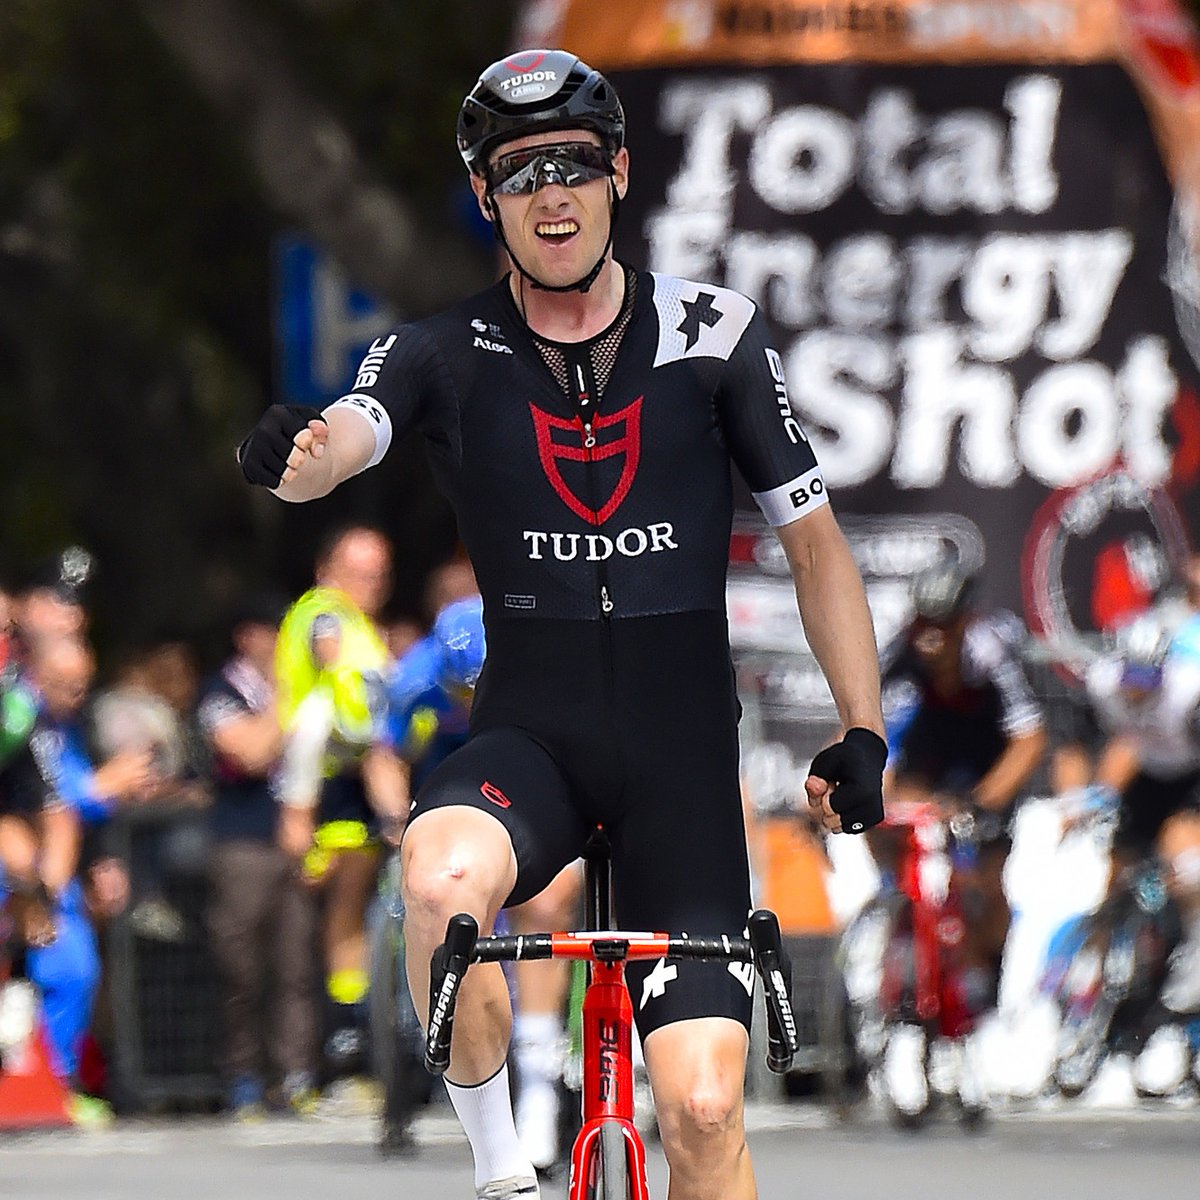 TUDOR TEAM TAKES STAGE 3 IN SICILY Perfect teamwork resulted in a 1st place for Joel Suter and the Tudor Pro Cycling Team today at the third stage of Il Giro di Sicilia. Pre-order your Tudor jersey now on assos.com or via the ASSOS App #BornToDare #SponsorYourself